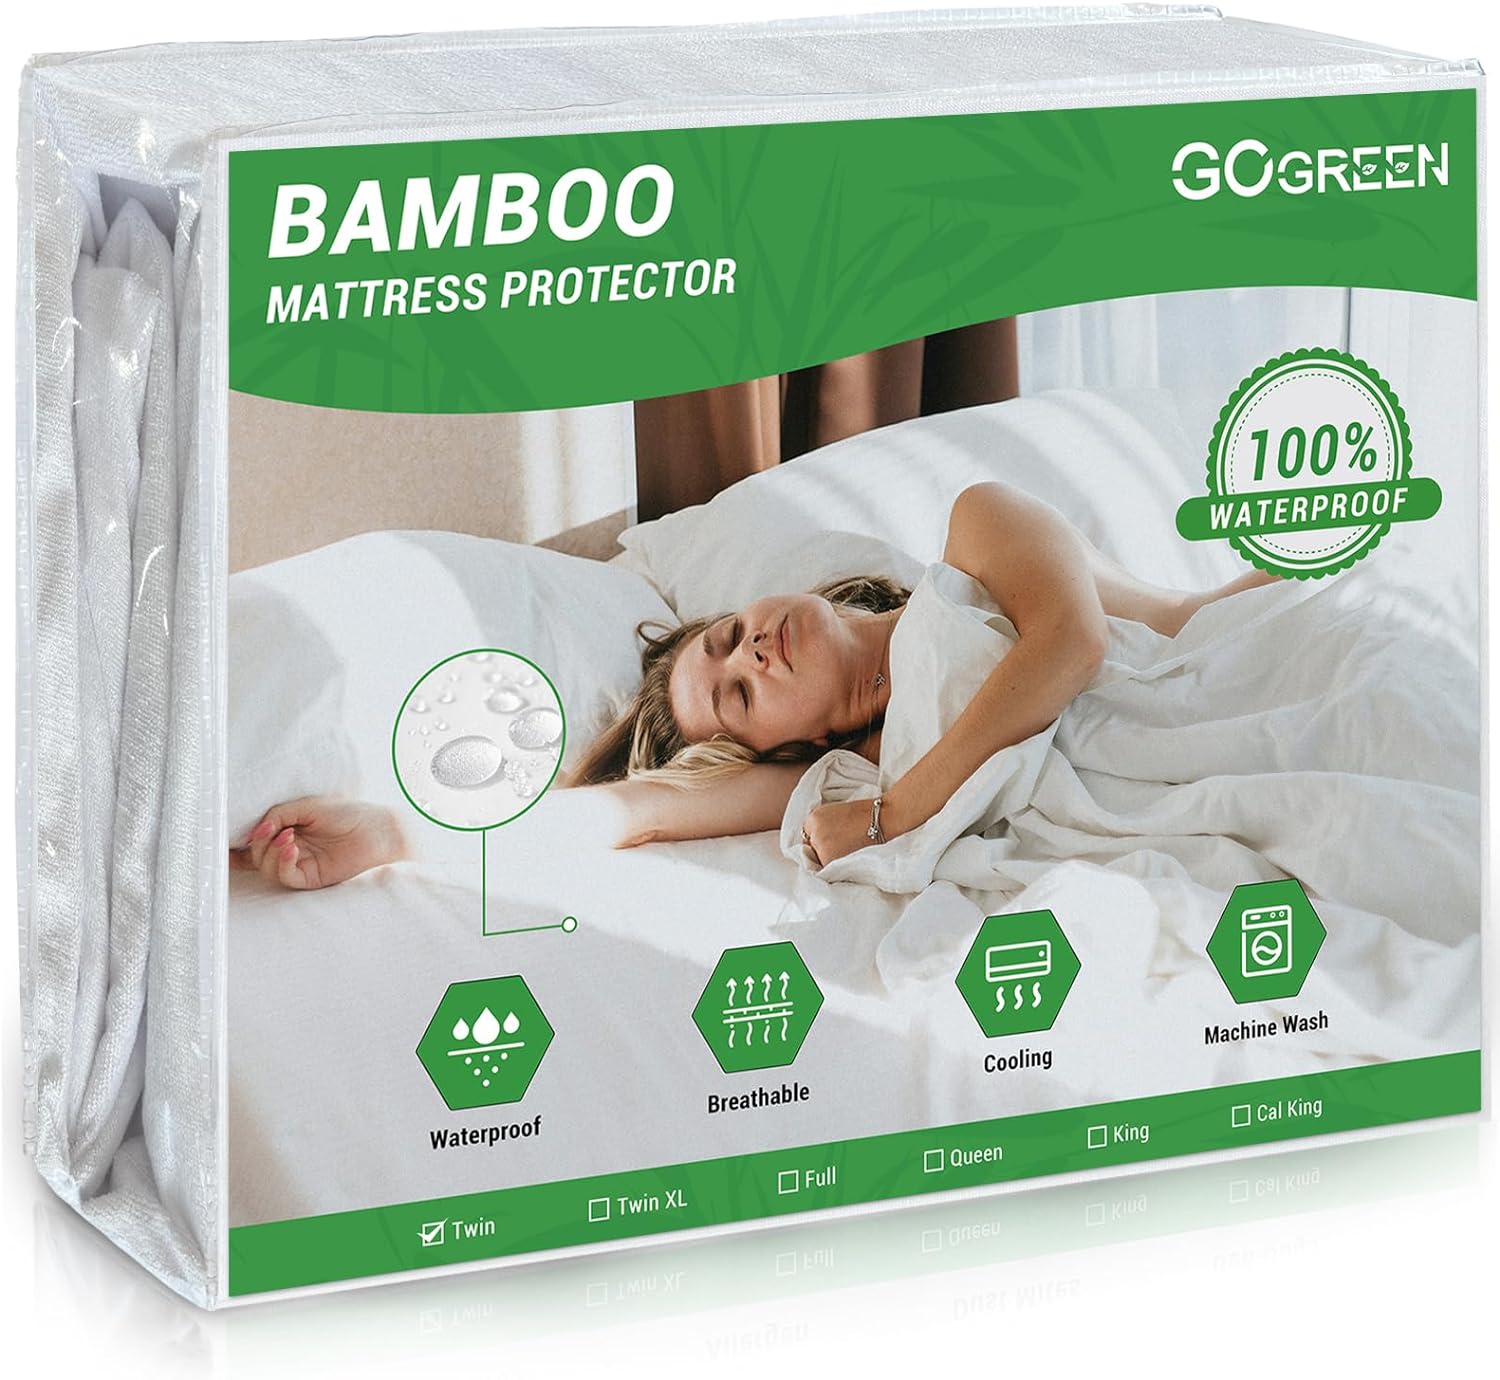 My only complaint is that this holds water and takes forever to dry when washing it. Everything else is perfect. It is extremely waterproof and protects my mattress perfectly, but it is also comfortable and quiet! You'd never know there is a mattress protector on my bed. It' pretty soft. There is no crinkling sound. It also washes out nicely, so no staining so far even when it' something like coffee that usually stains easily. It' perfect for my house full of messy children and pets, where sp